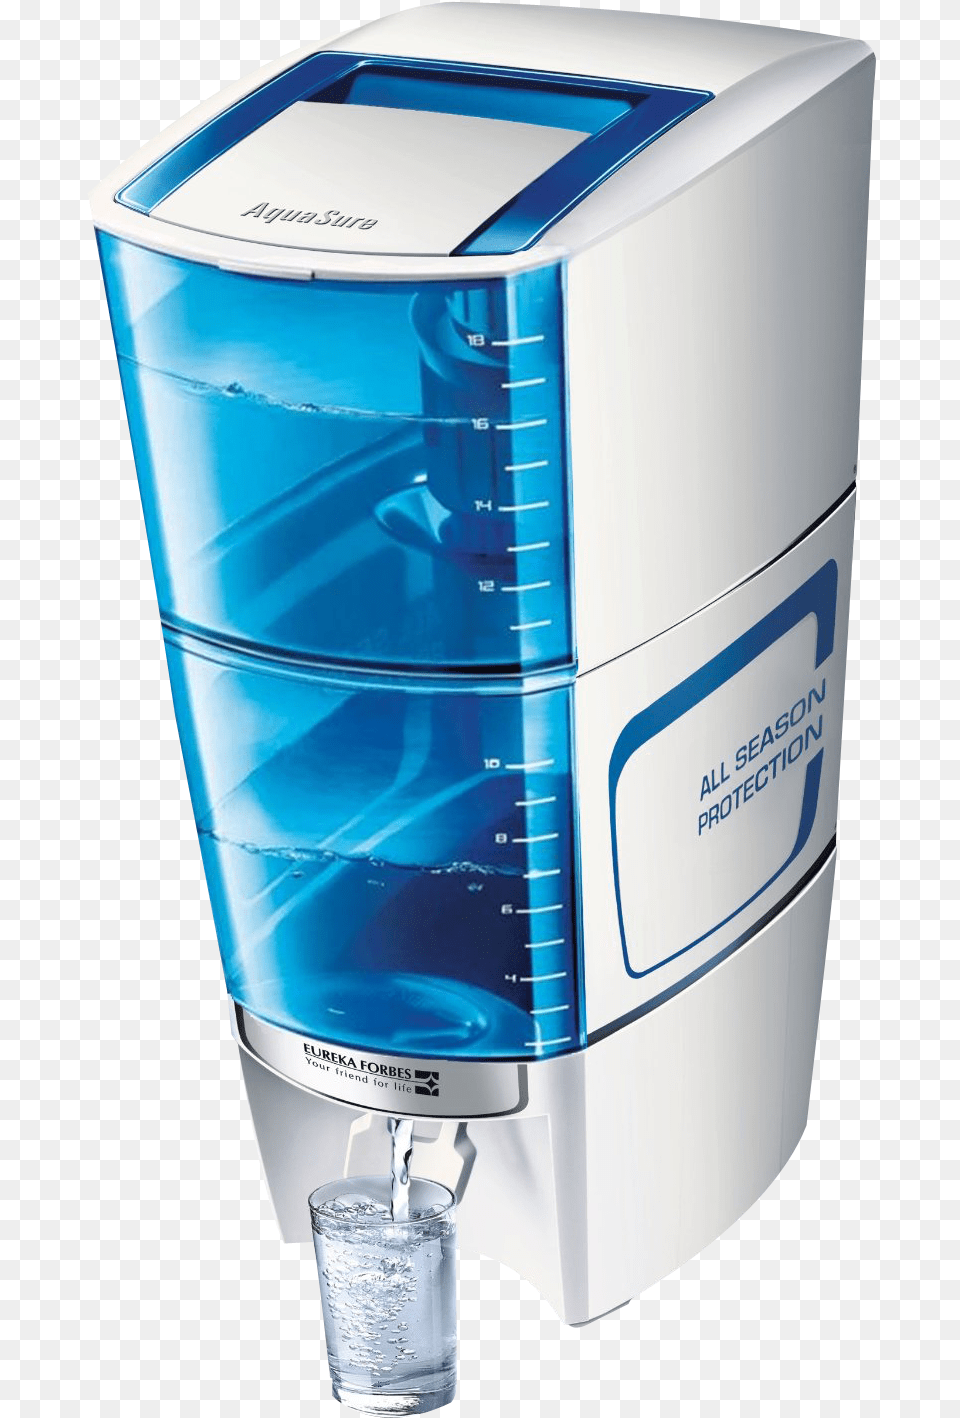 Water Purifier With Glass Image Pngpix Eureka Forbes Water Purifier Amrit, Appliance, Cooler, Device, Electrical Device Png